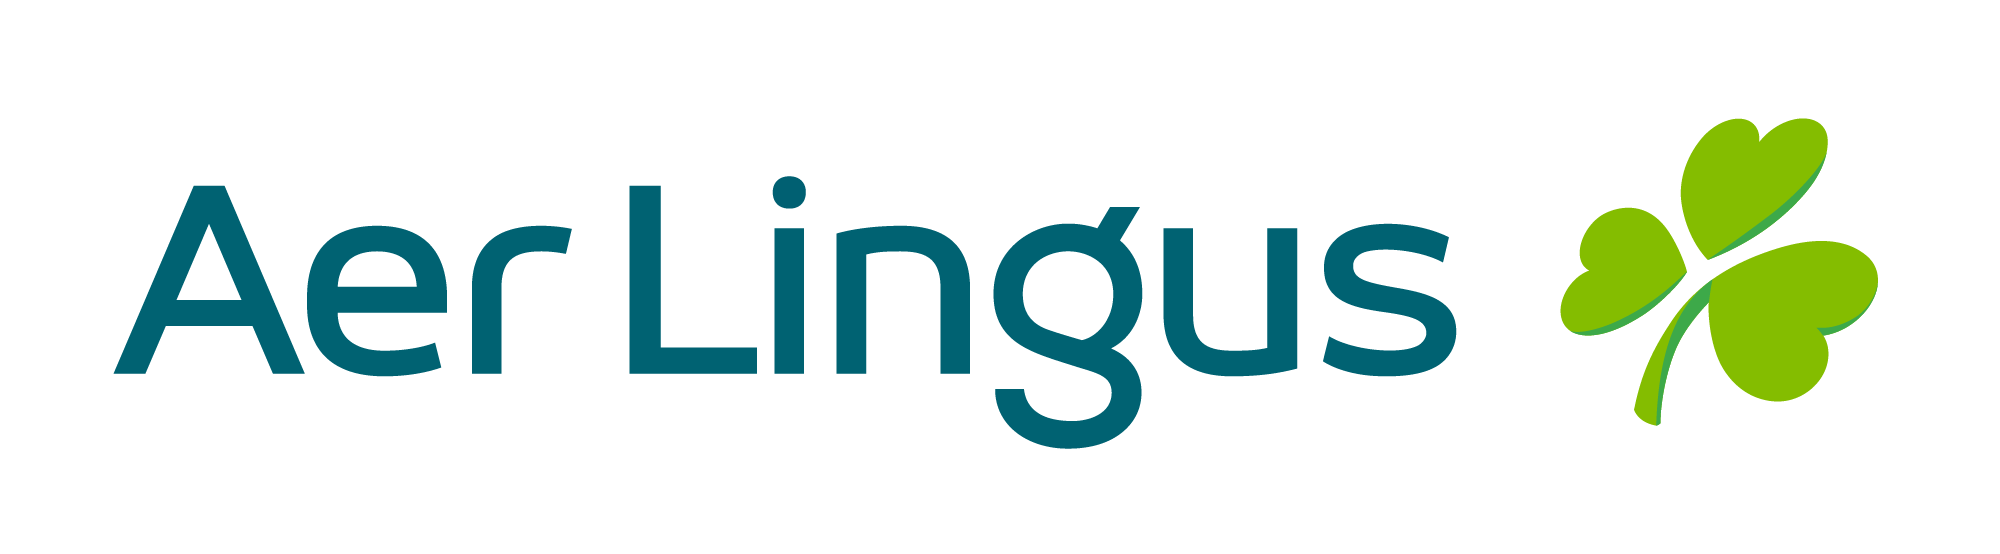 New Logo, Identity, and Livery for Aer Lingus by Lippincott